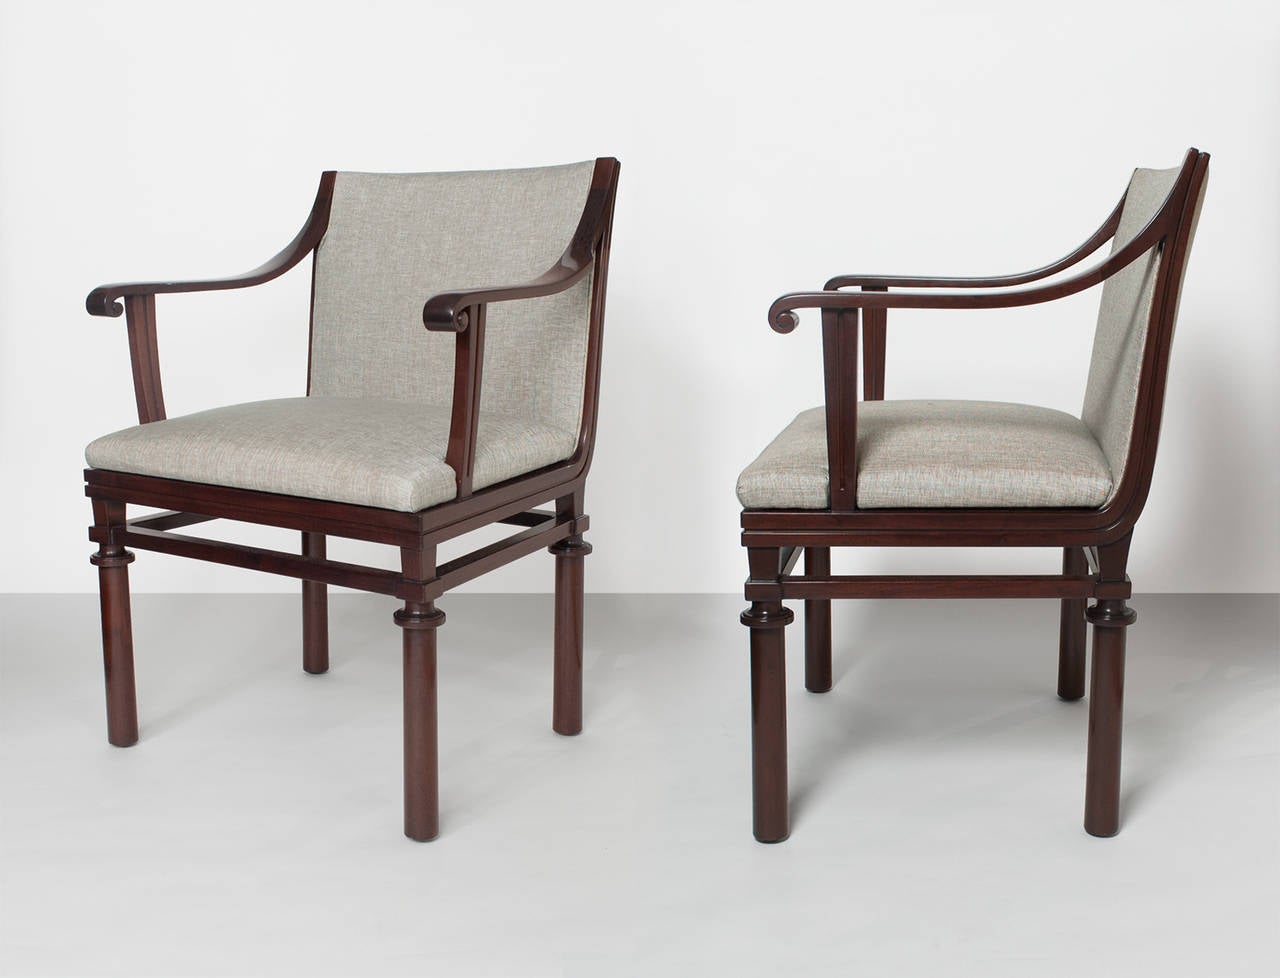 Pair of fine Swedish art deco solid Cuban mahogany armchairs designed by Carl Malmsten for NK (Nordiska Kompaniet) Stockholm. Newly restored and upholstered. Metal tags and 